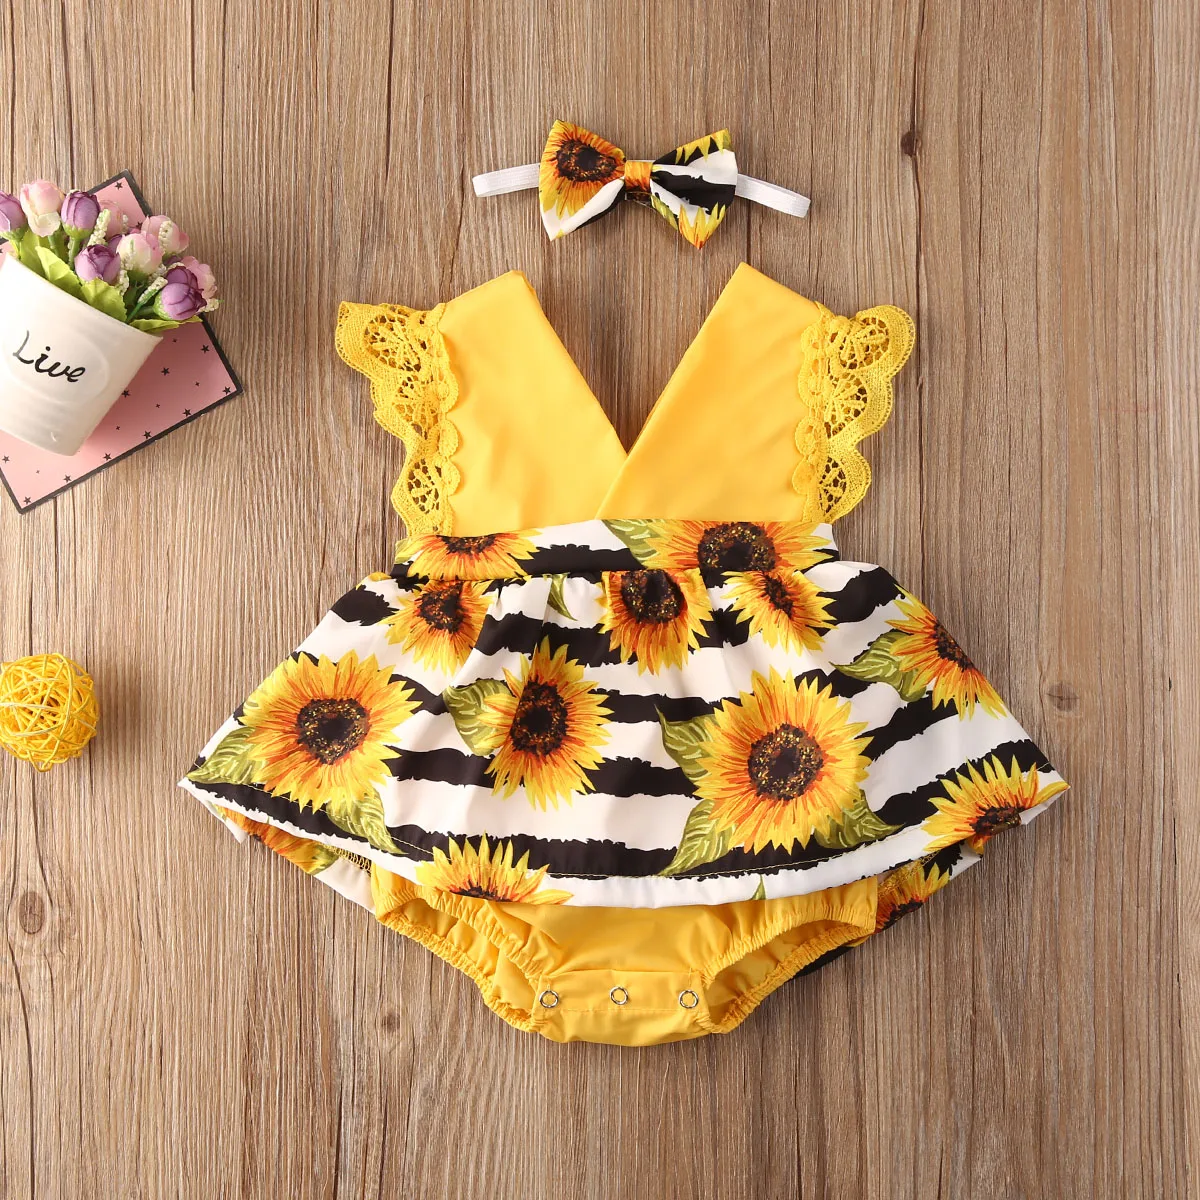 

HS Newborn Baby Girl Clothes Lace Ruffle Sunflower Print Romper Headband 2Pcs Summer Sleeveless Outfits Sunsuit for 0-24Months